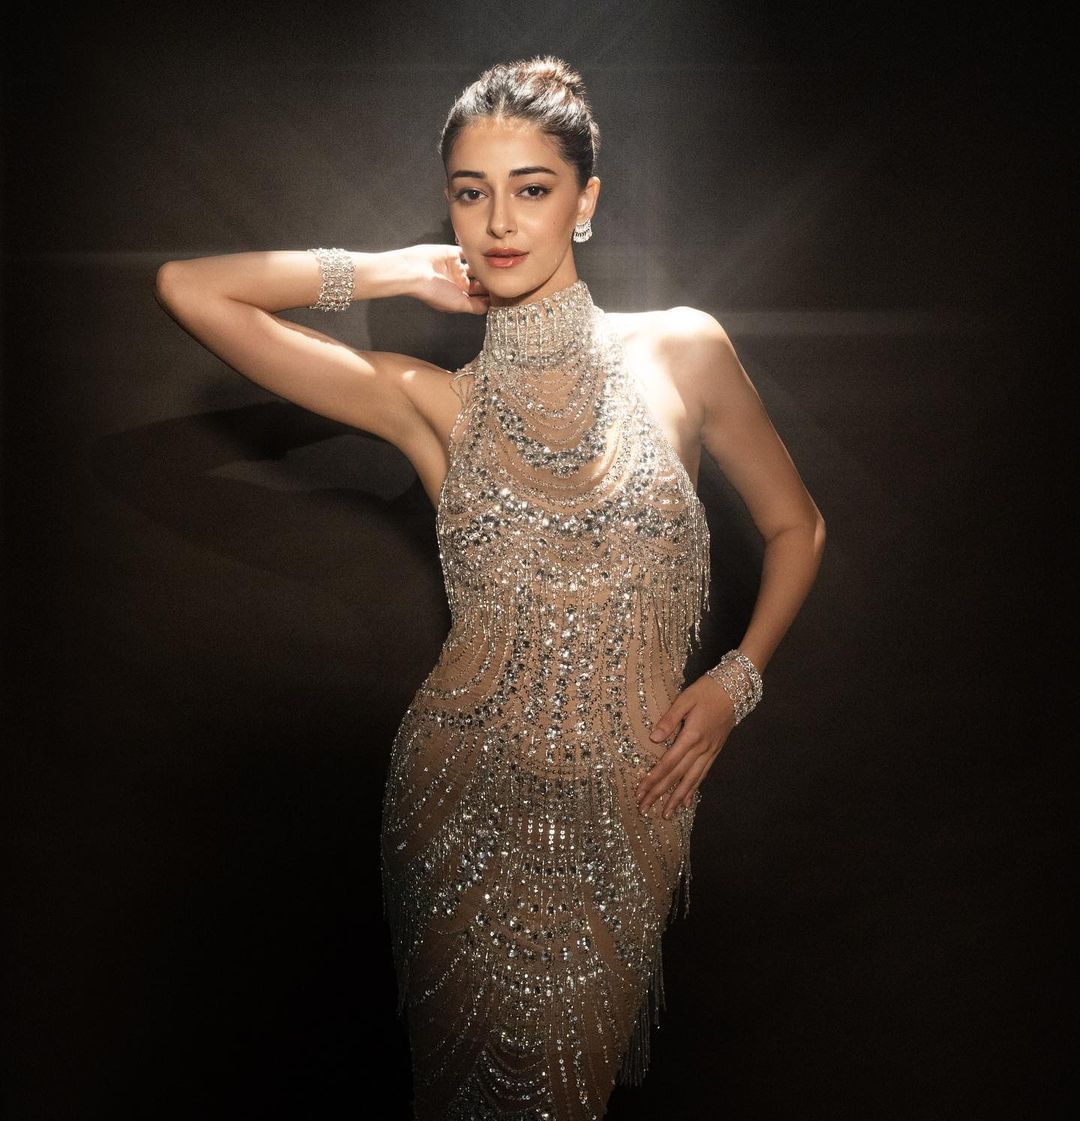 Ethnic Inspirations To Take From Ananya Panday! – Fashion Trends